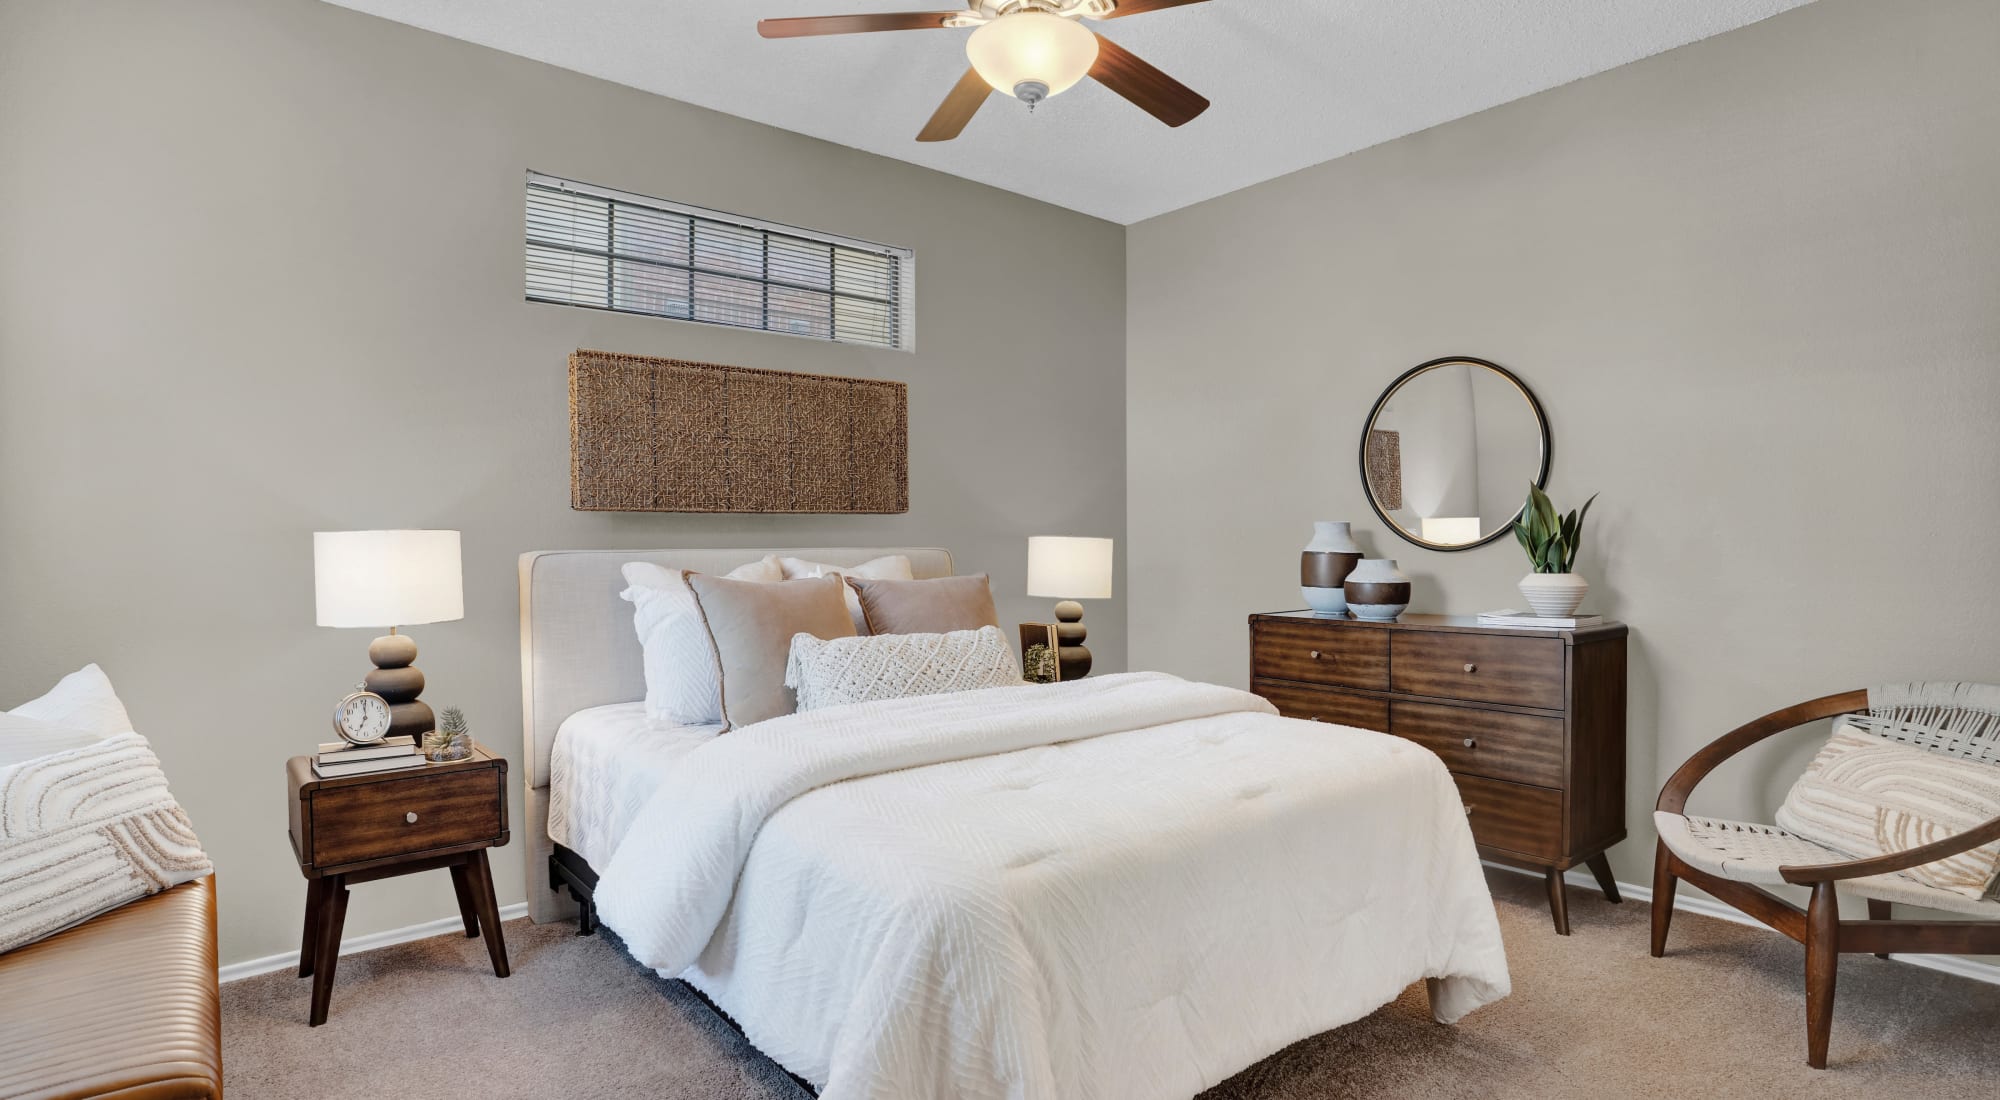 Bedroom with ceiling fan at Carrollton Park of North Dallas